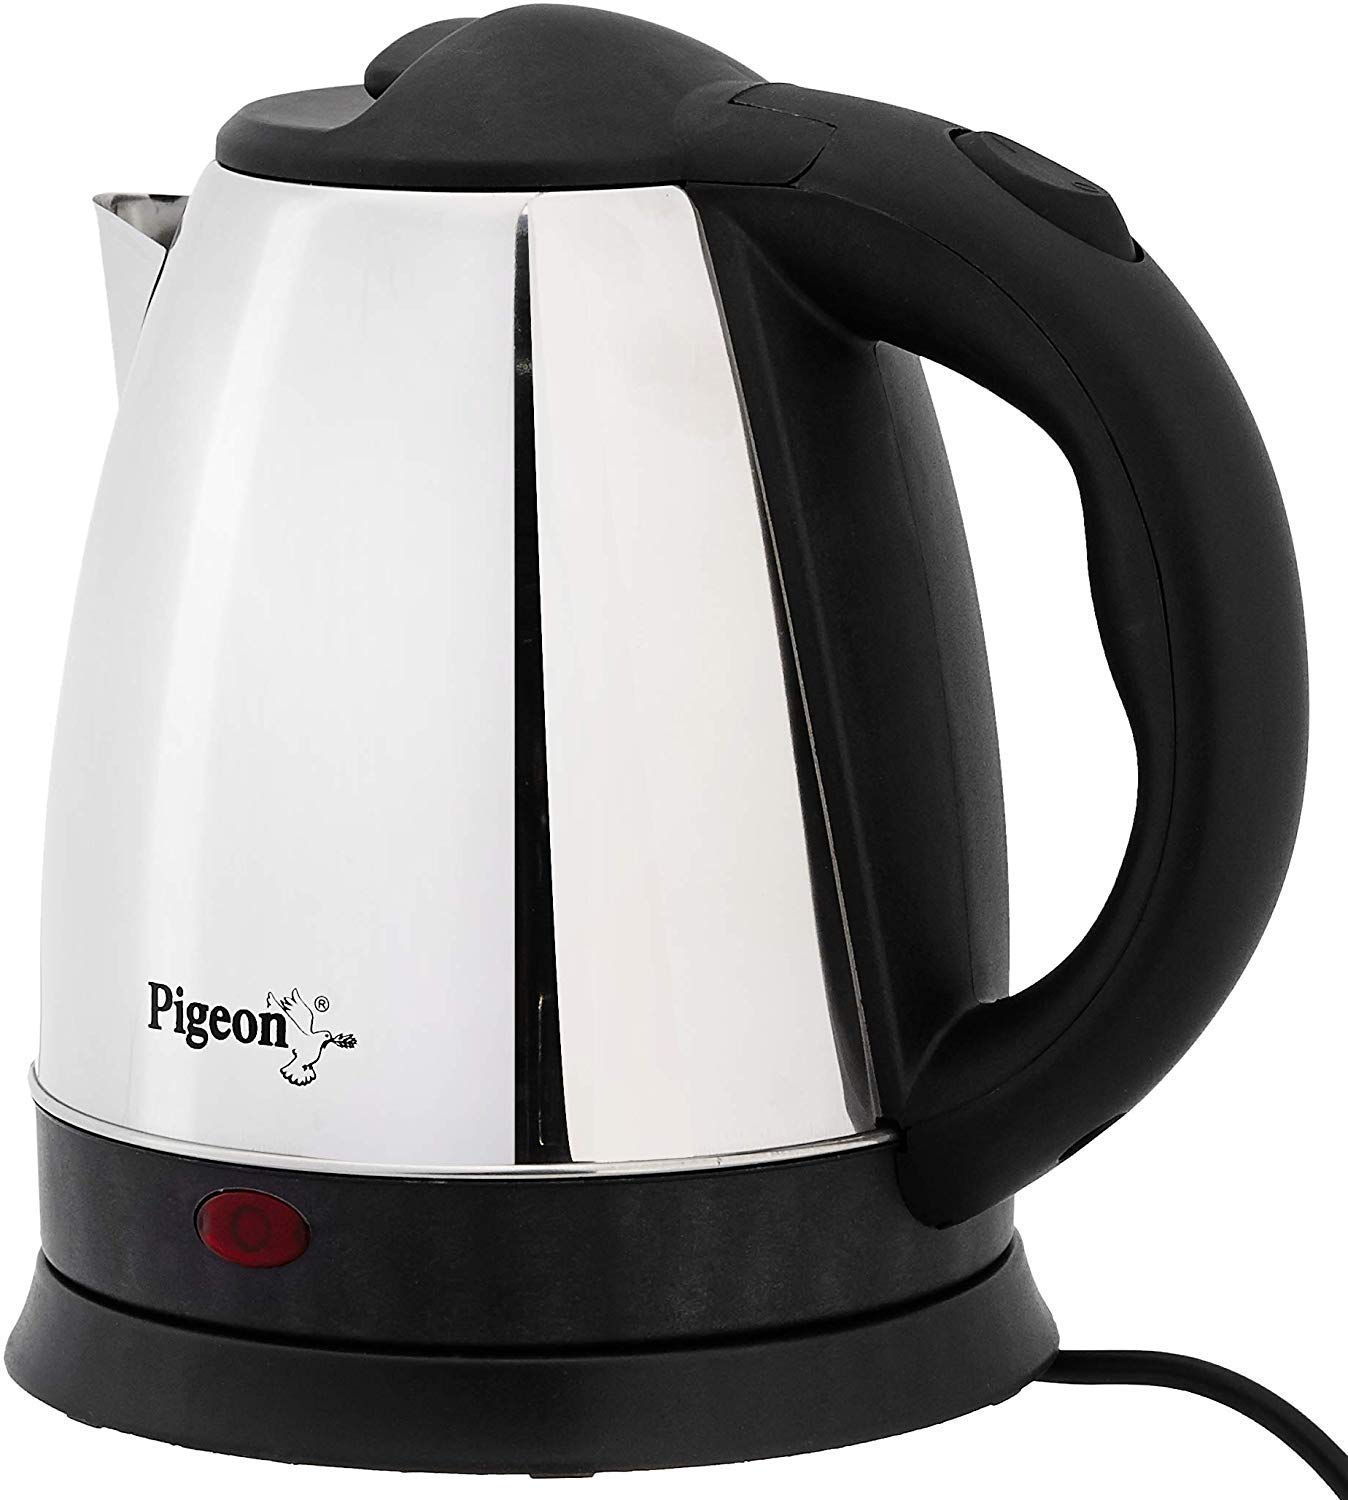 pigeon electric kettle price